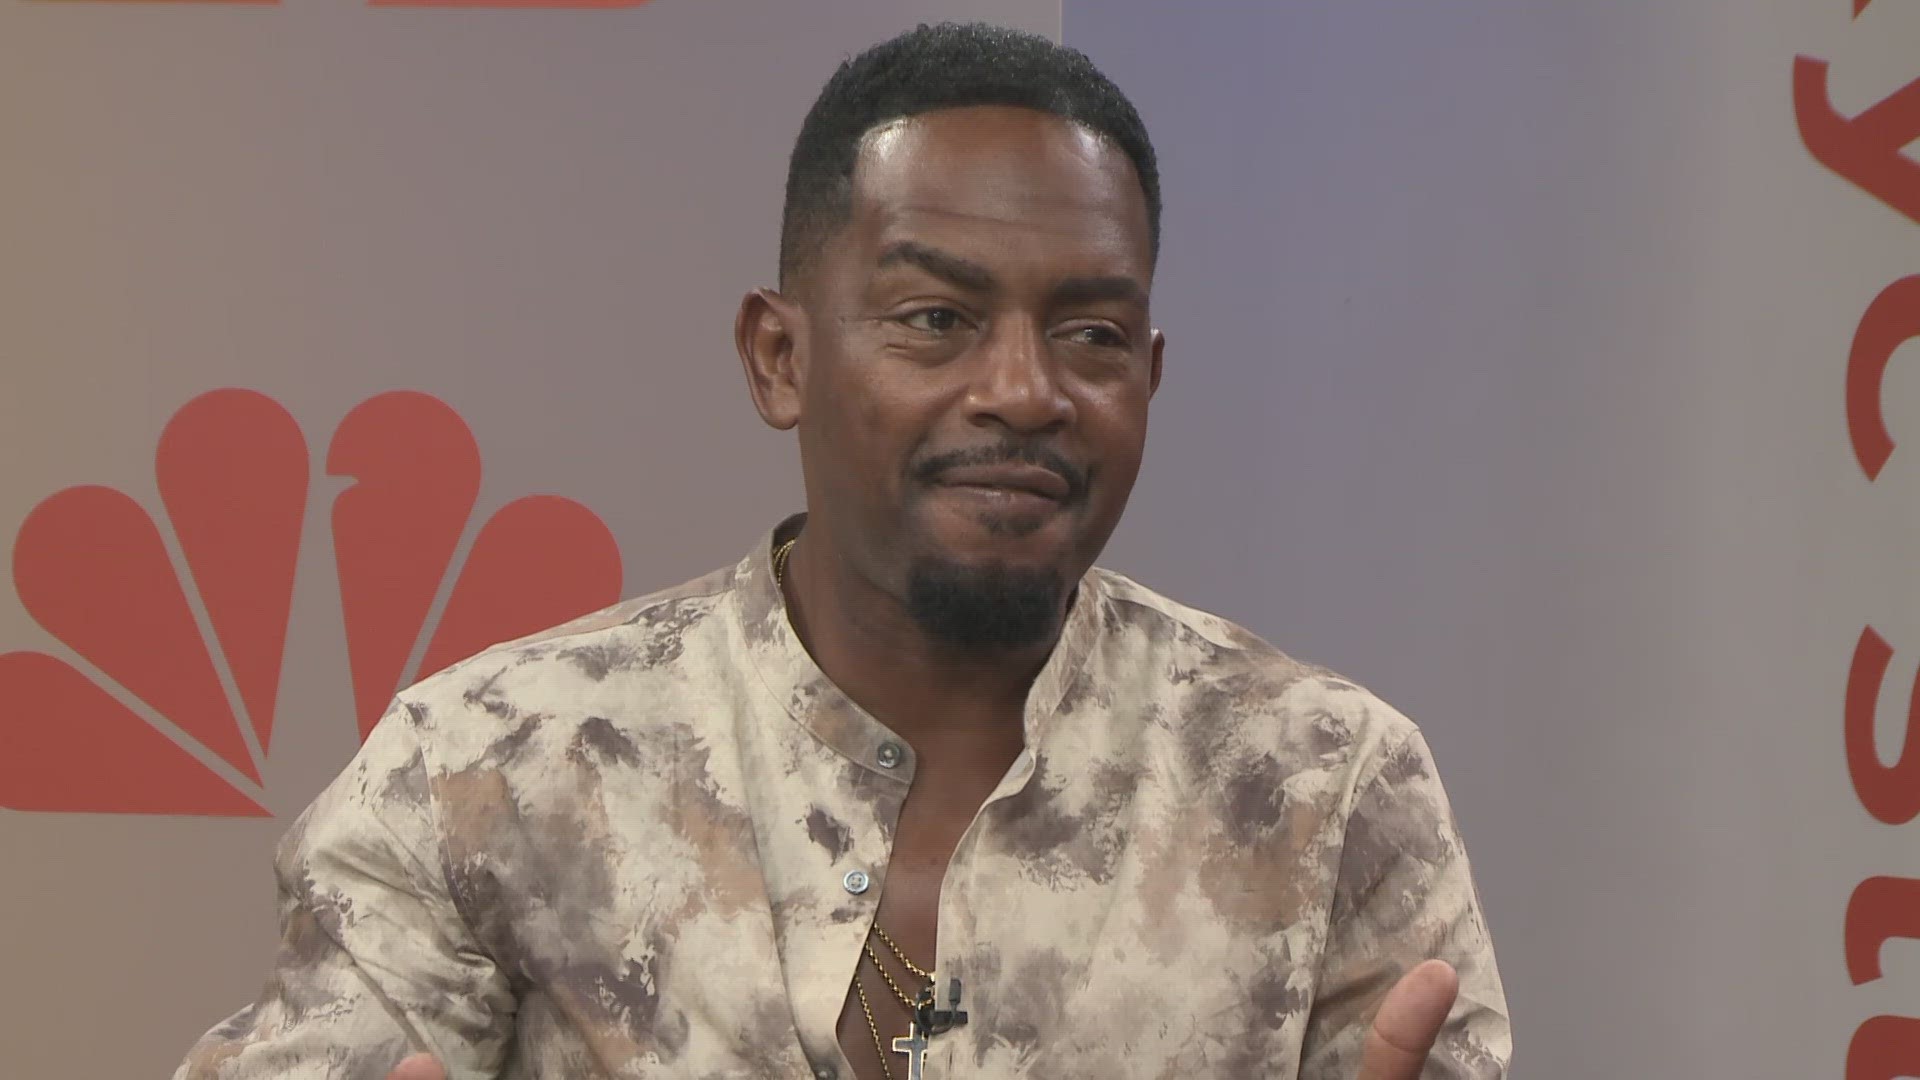 MTV legend Bill Bellamy has a series of shows at the Cleveland Improv this weekend. He stopped by 3News to discuss his career with Laura Caso and Lindsay Buckingham.